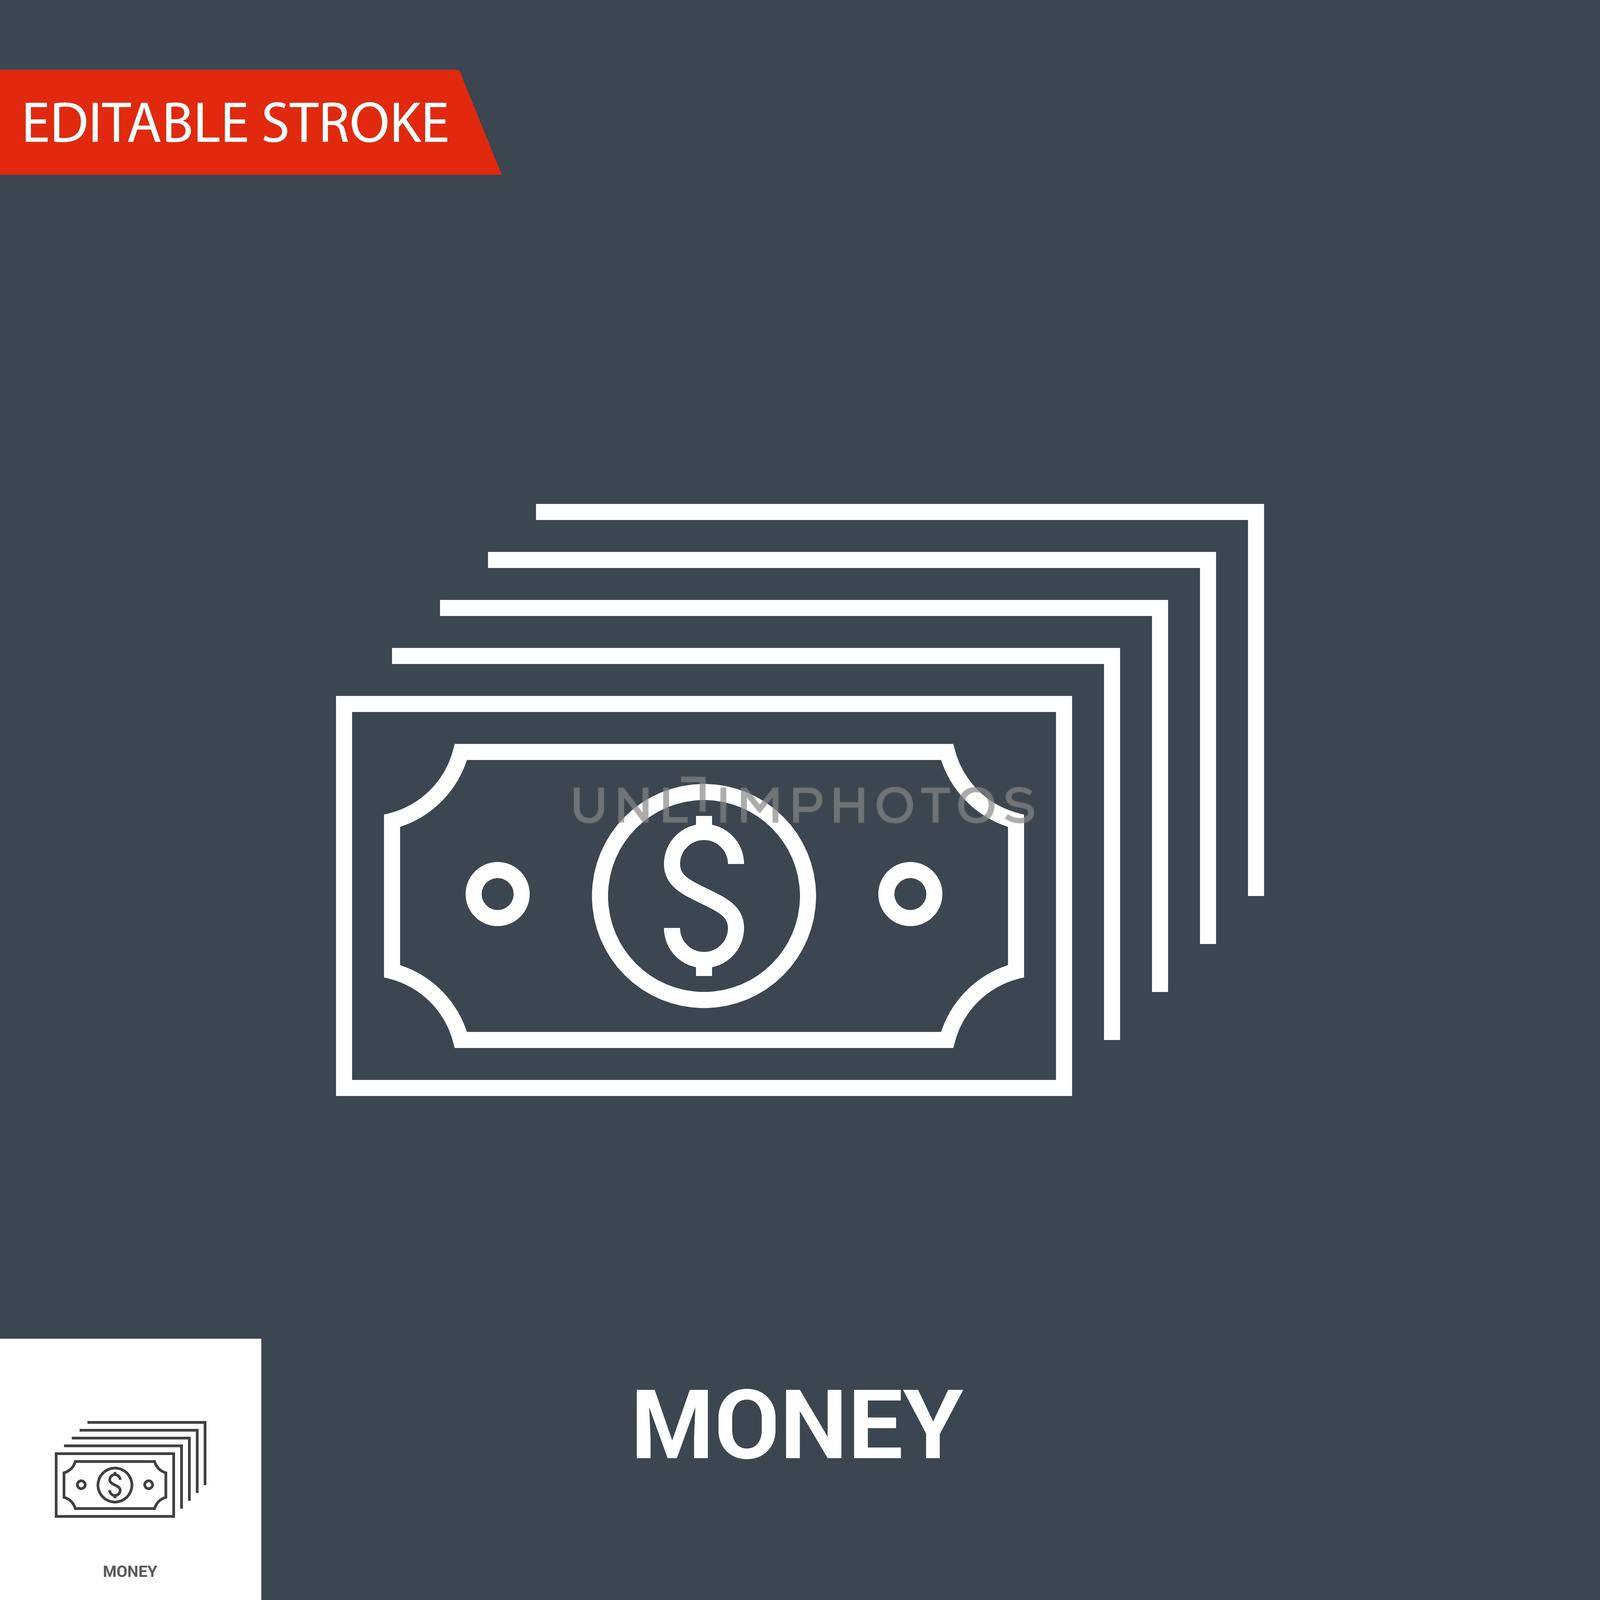 Money Icon. Thin Line Vector Illustration. Adjust stroke weight - Expand to any Size - Easy Change Colour - Editable Stroke